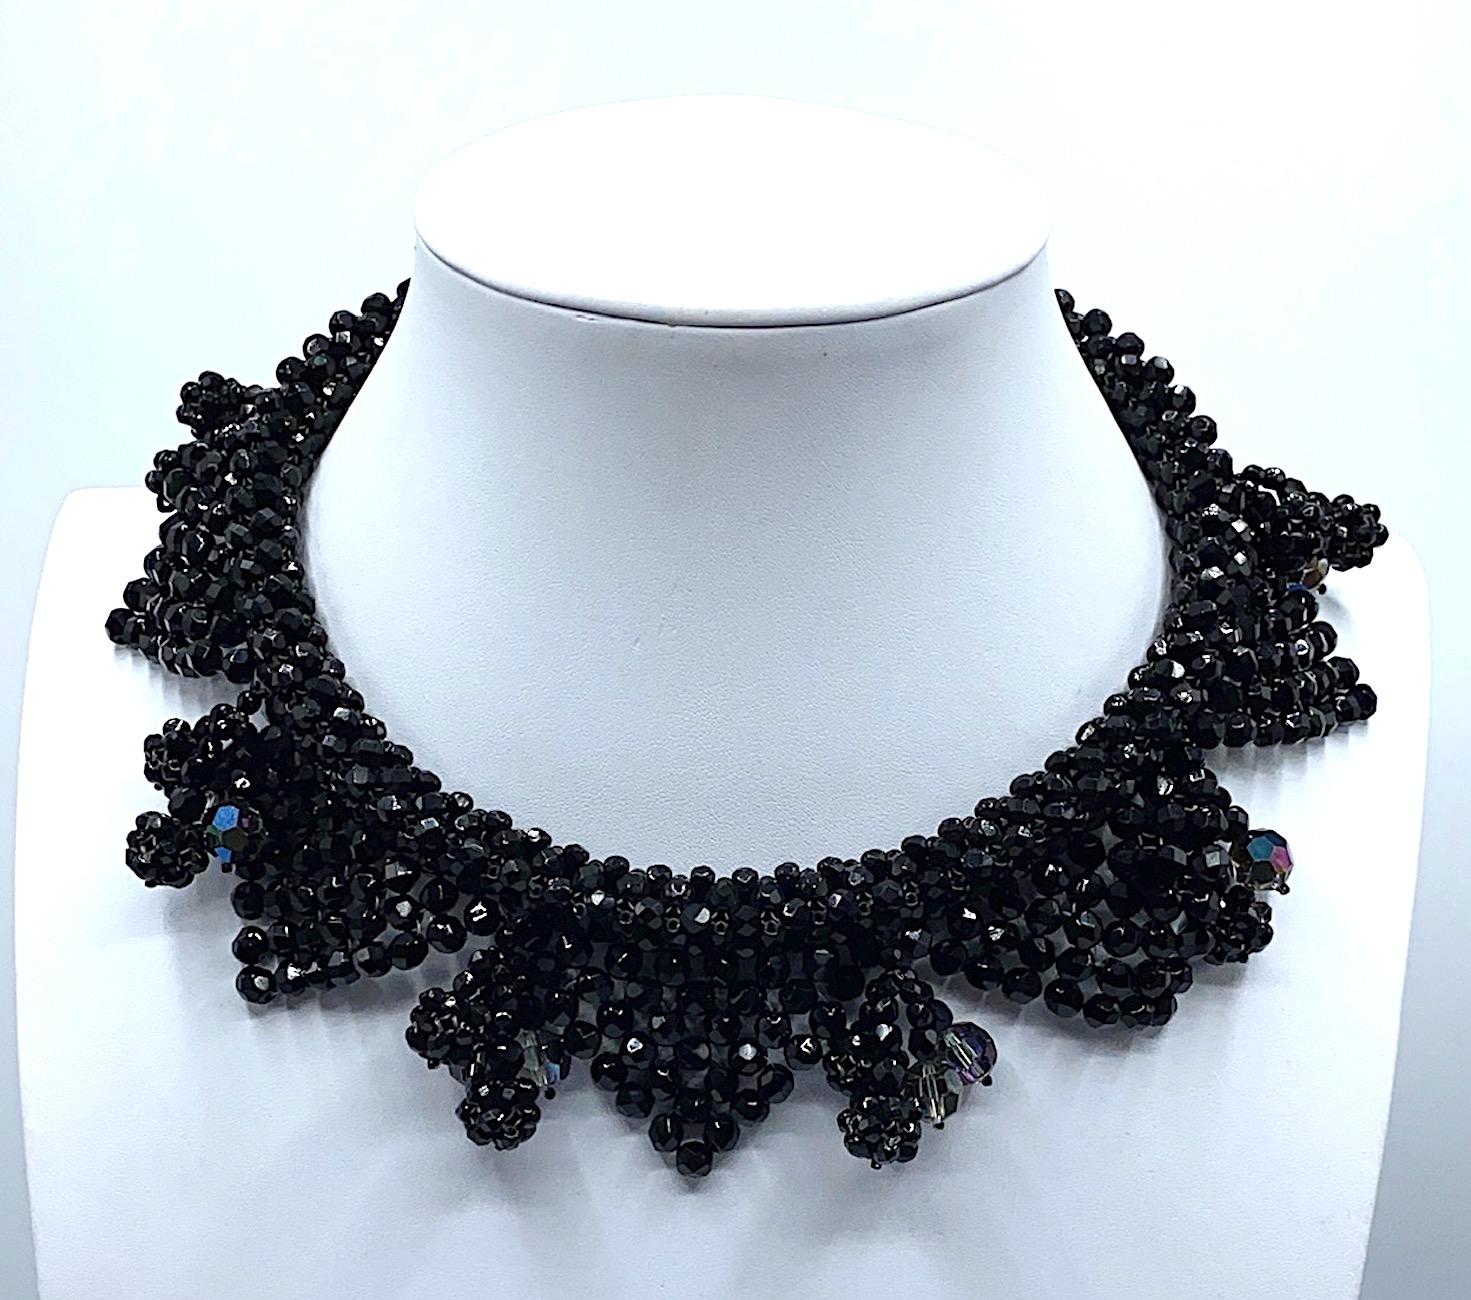 A rare and elegant 1950s woven crystal bead collar necklace by Italian costume jewelry company Bijoux Lo.Sa. Bijoux Lo.Sa has been attributed as the manufacturer for many of the prototypes of jewelry designed by Italian fashion jewelry company